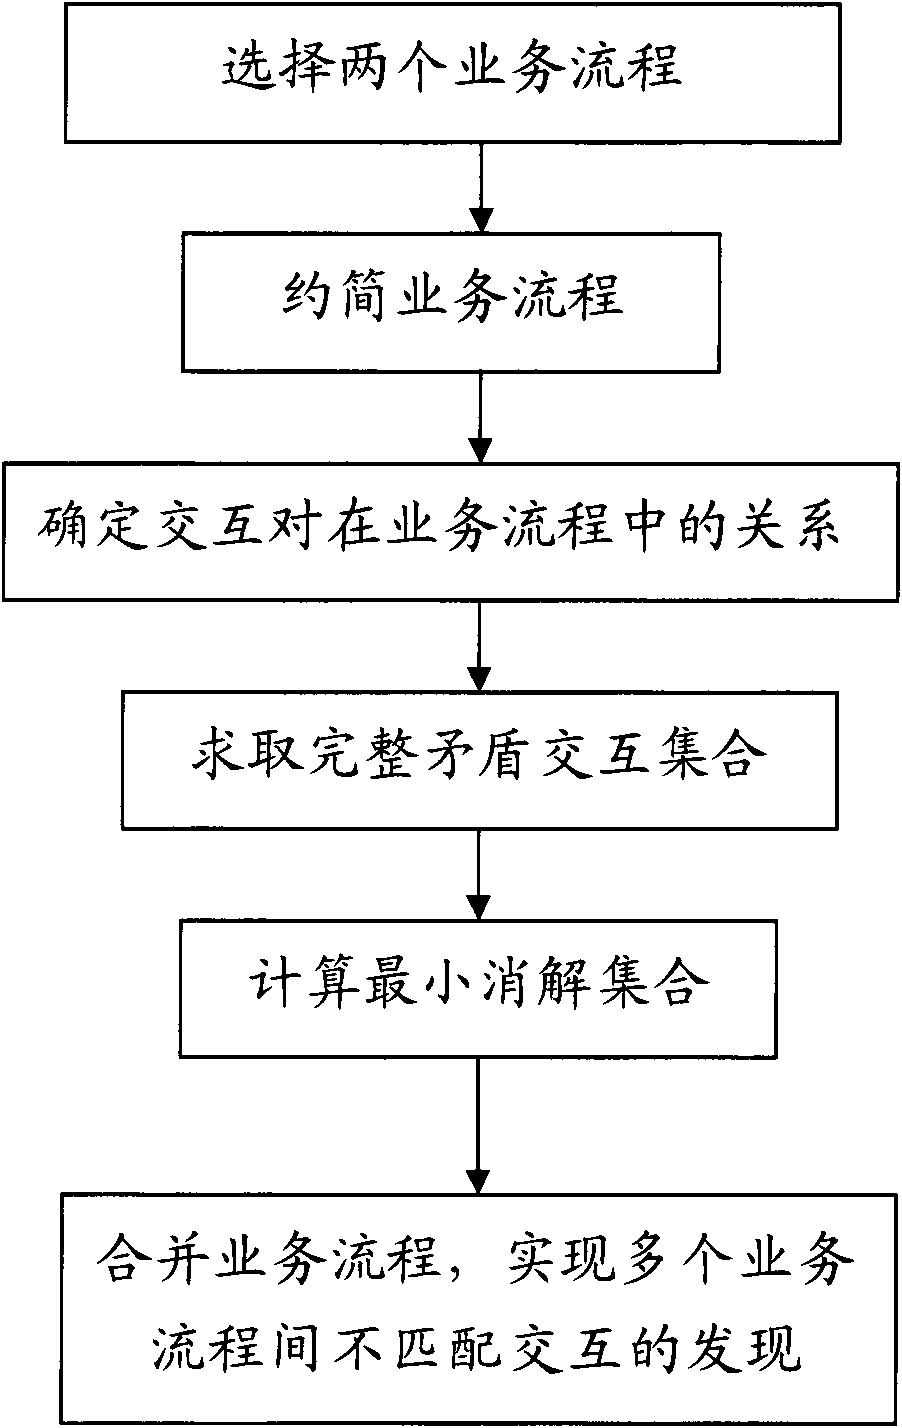 Discovery method of mismatched interaction between operation flows